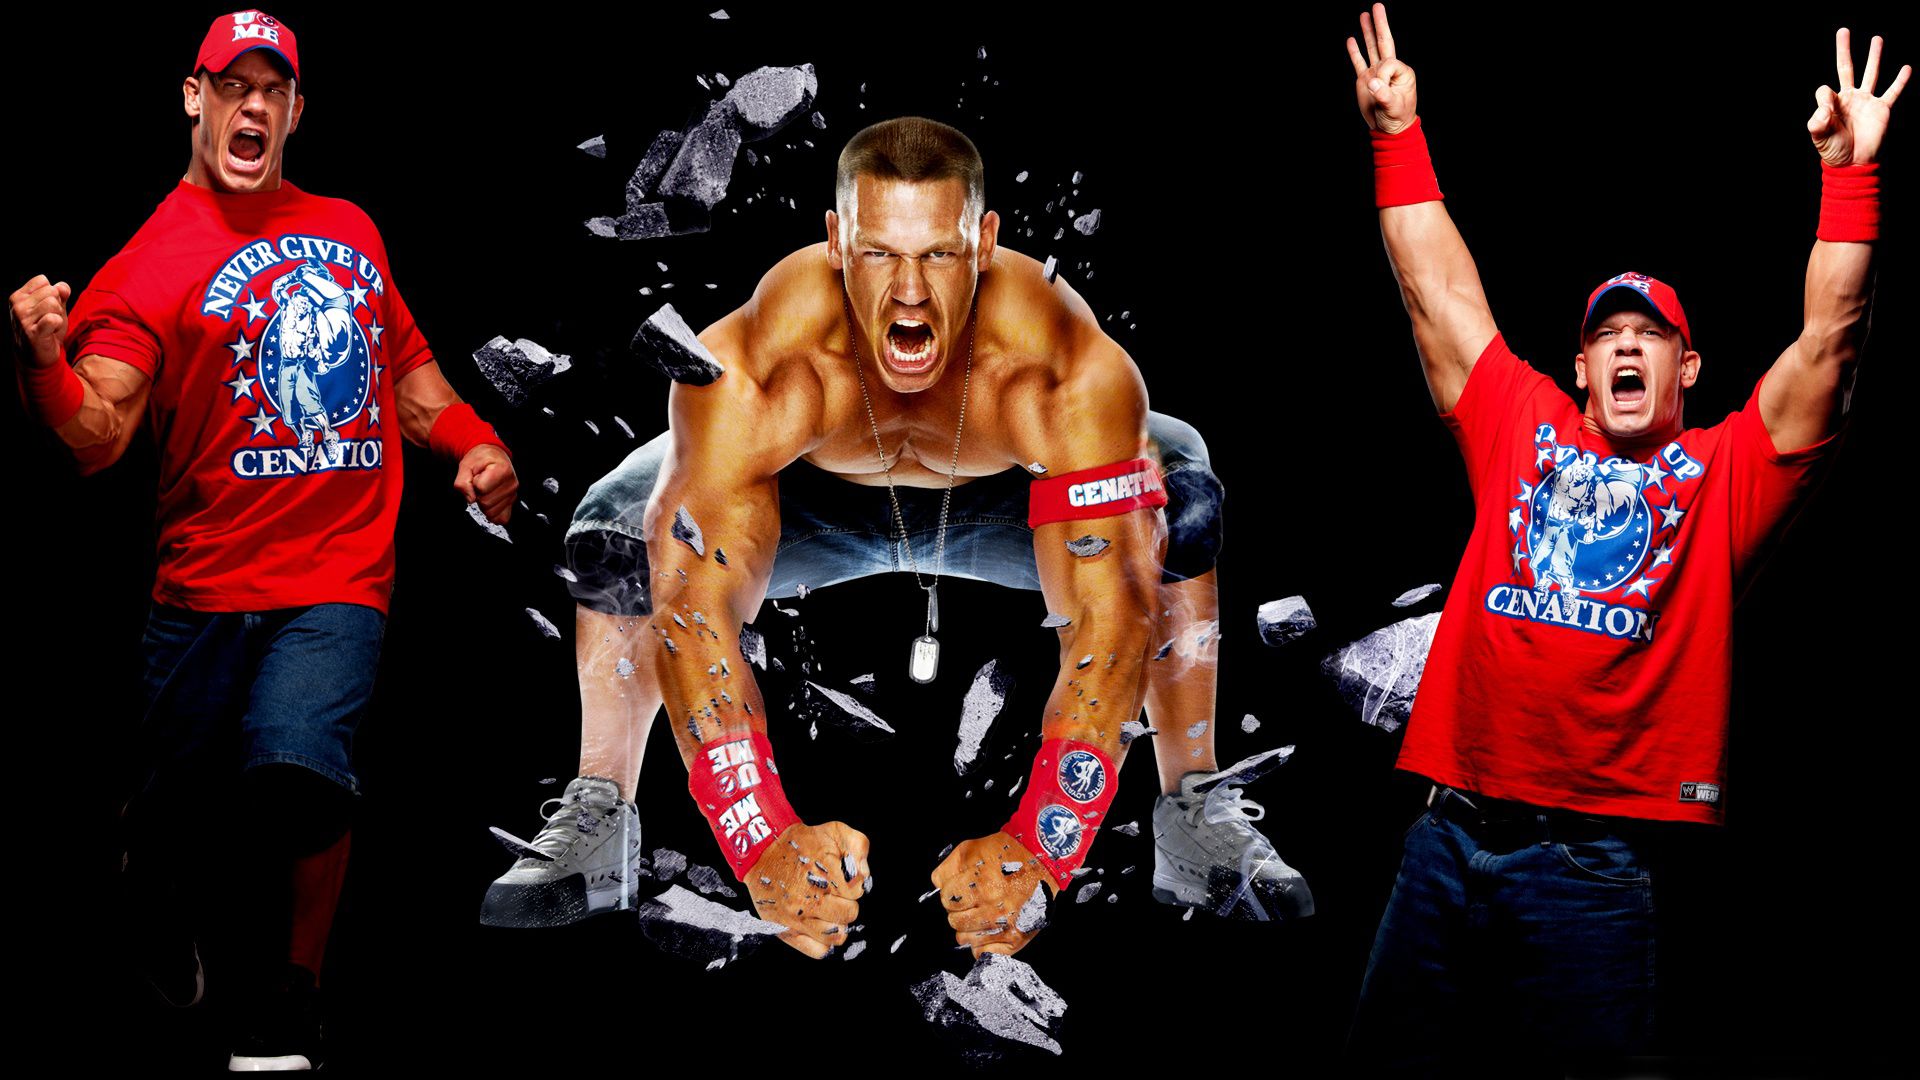 wwe all superstars wallpaper,wrestler,professional wrestling,muscle,individual sports,shootfighting